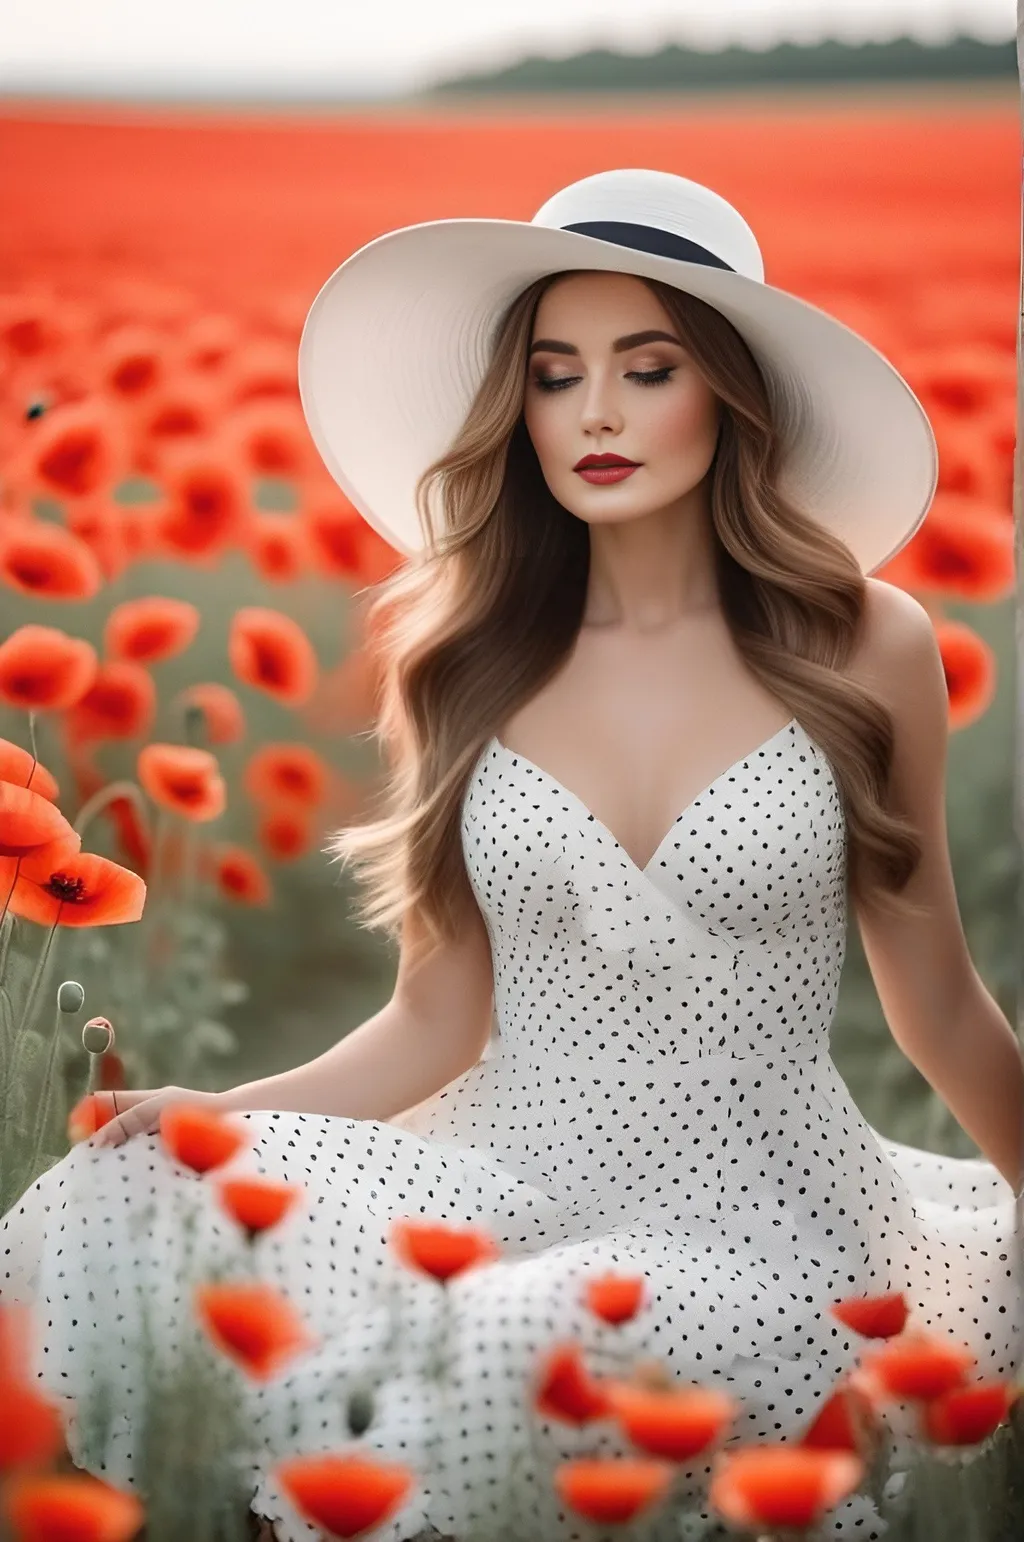 Prompt: A beautiful woman wearing an elegant white dress with black polka dots, sitting in the middle of a poppy field. She has long wavy hair and is wearing a large hat. High quality photo in the style of cinematic light, bright colors, ultra realistic portrait photography.